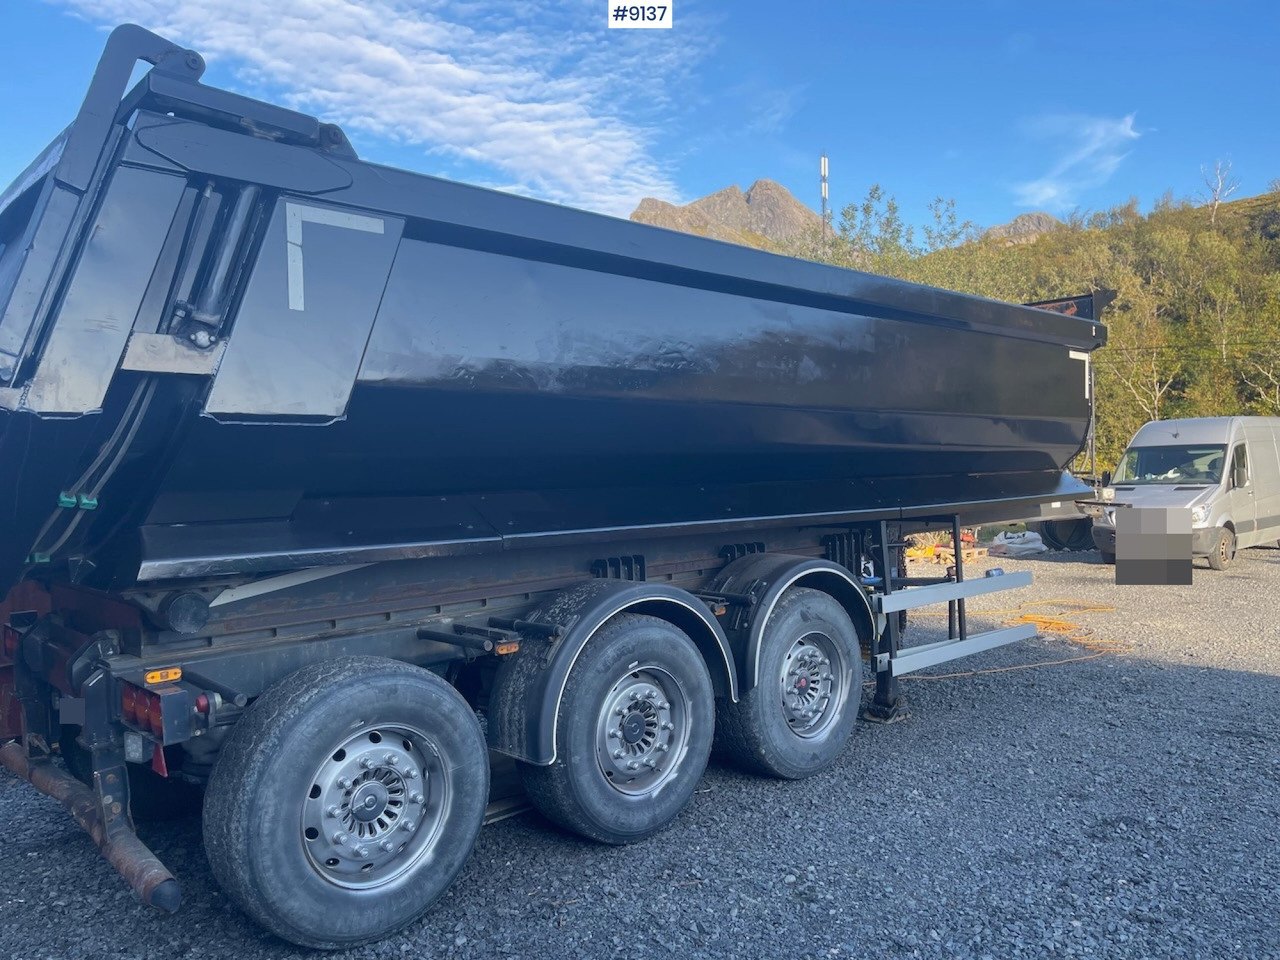 Leasing of  Carnehl tipping semi trailer in good condition Carnehl tipping semi trailer in good condition: picture 2